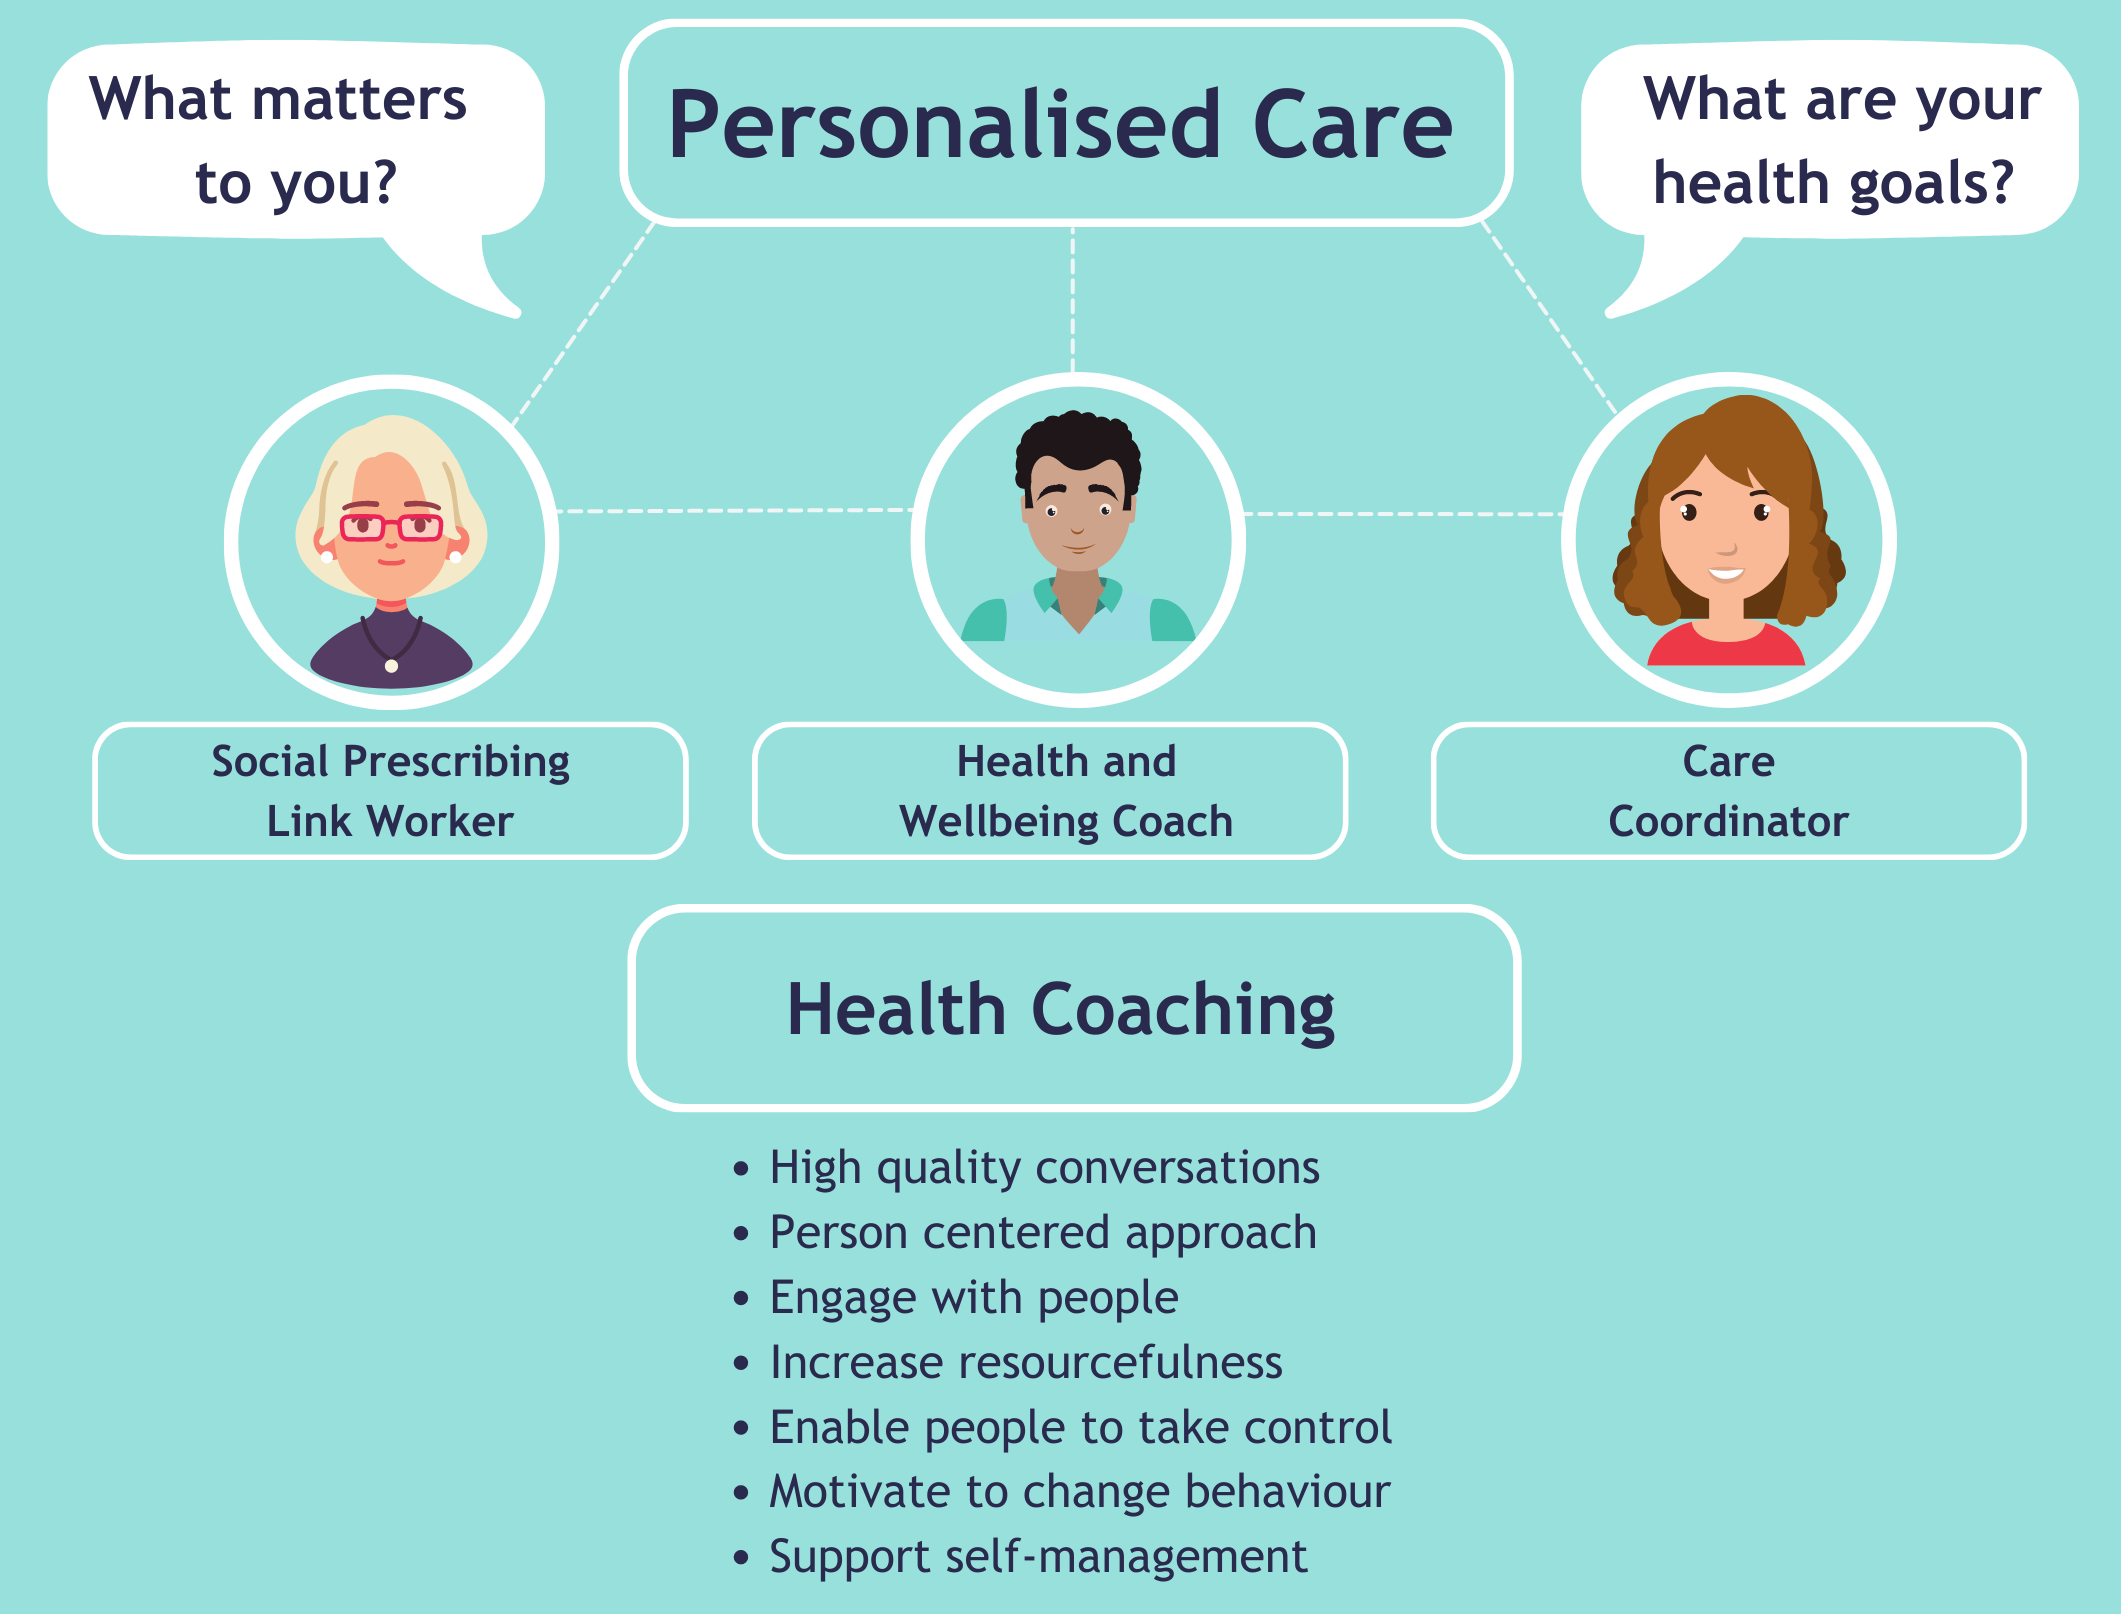 Personalised care